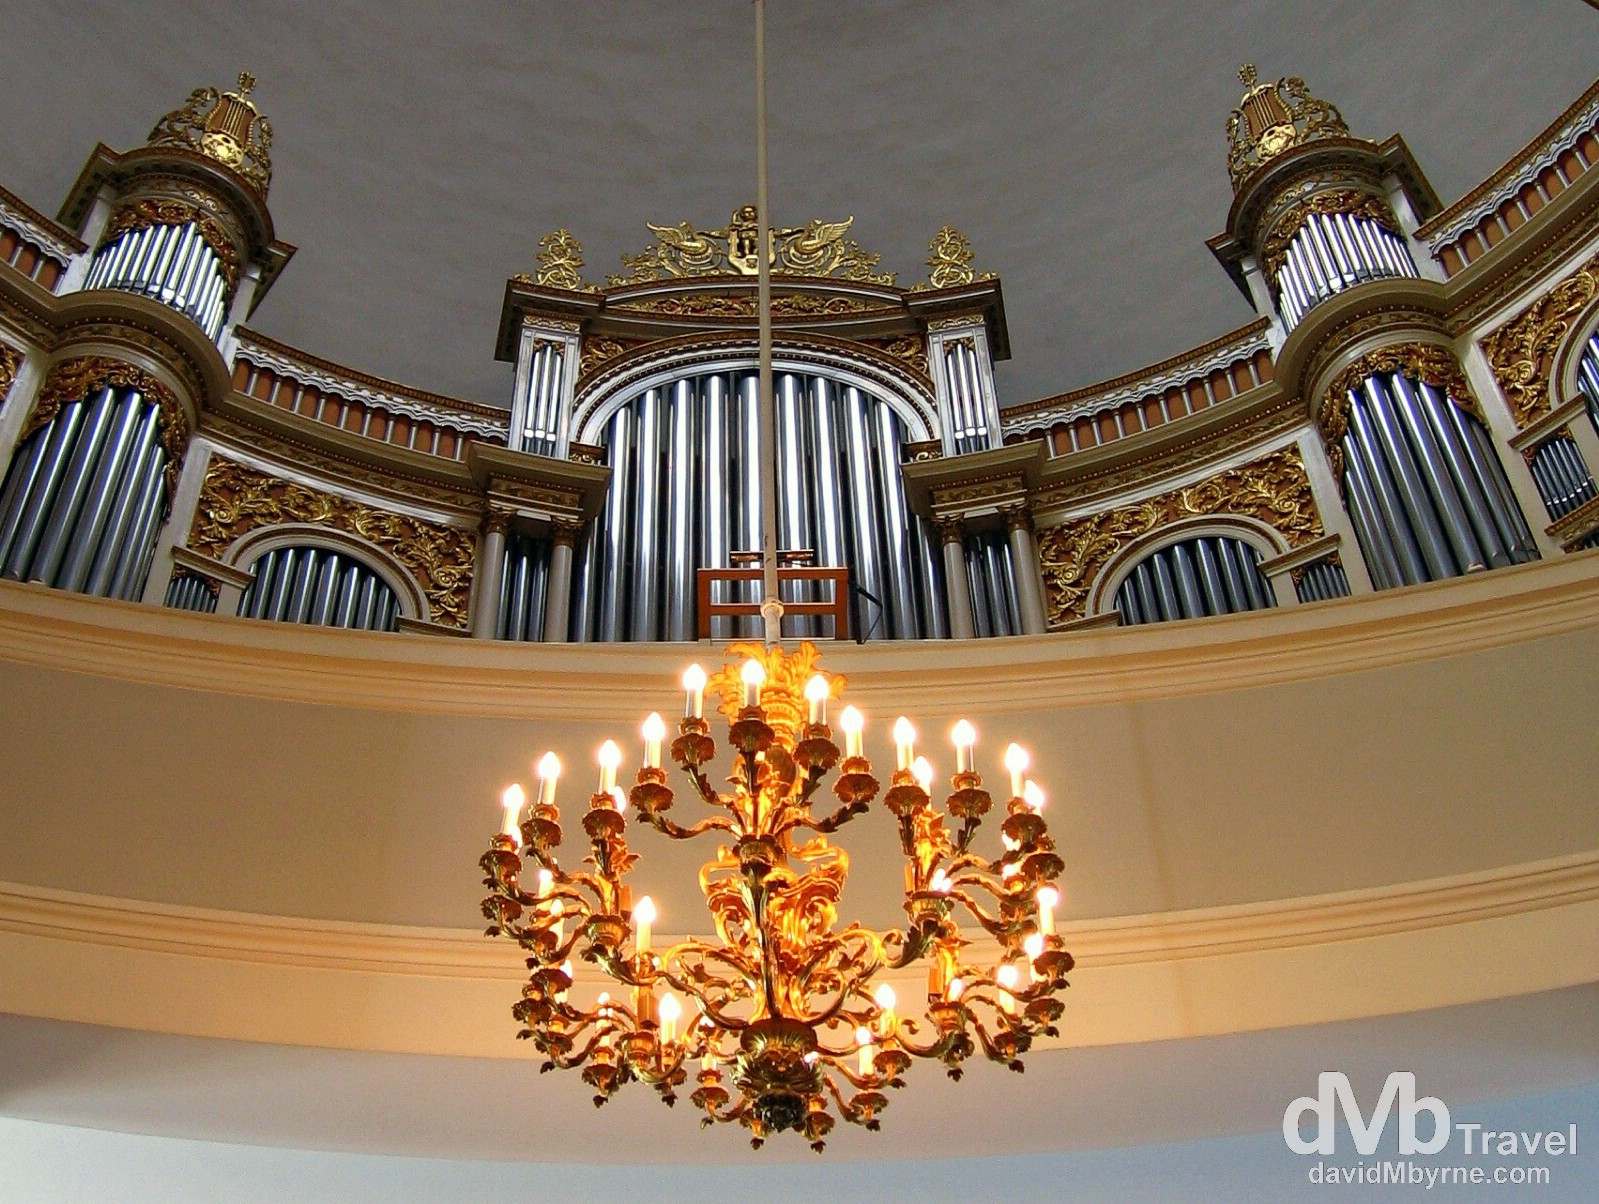 The organ of the cathedral in Helsinki, Finland. March 1, 2006.